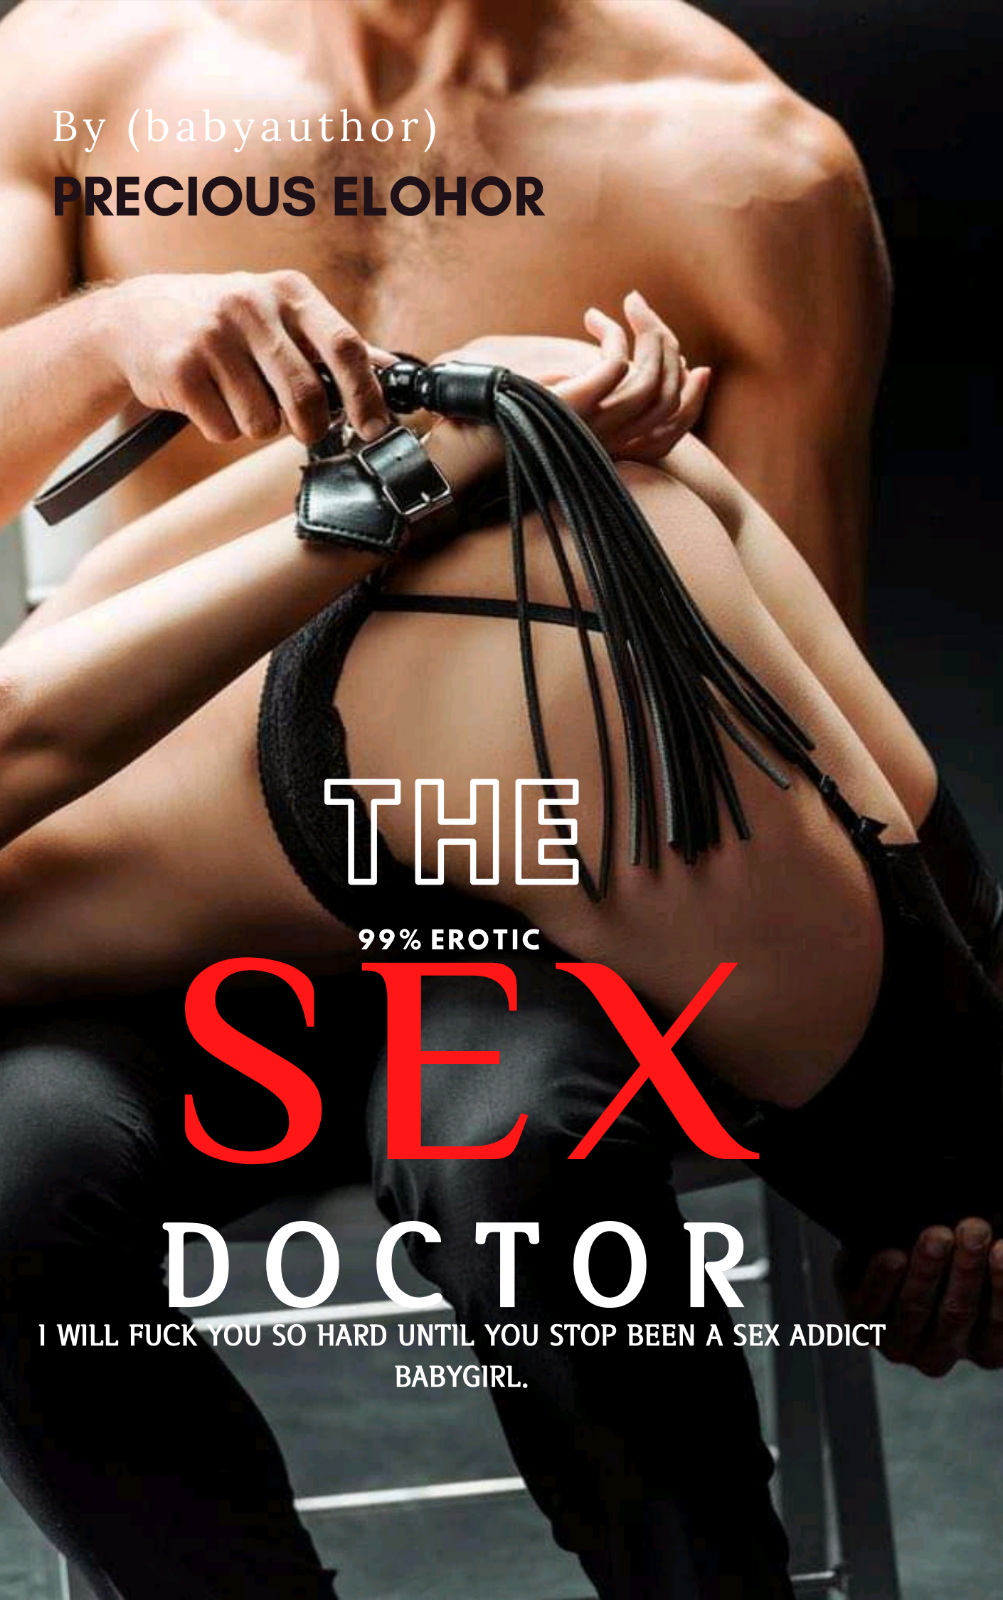 THE SEX DOCTOR HIS SUBMISSIVE (18+) Novel Full Story Book pic